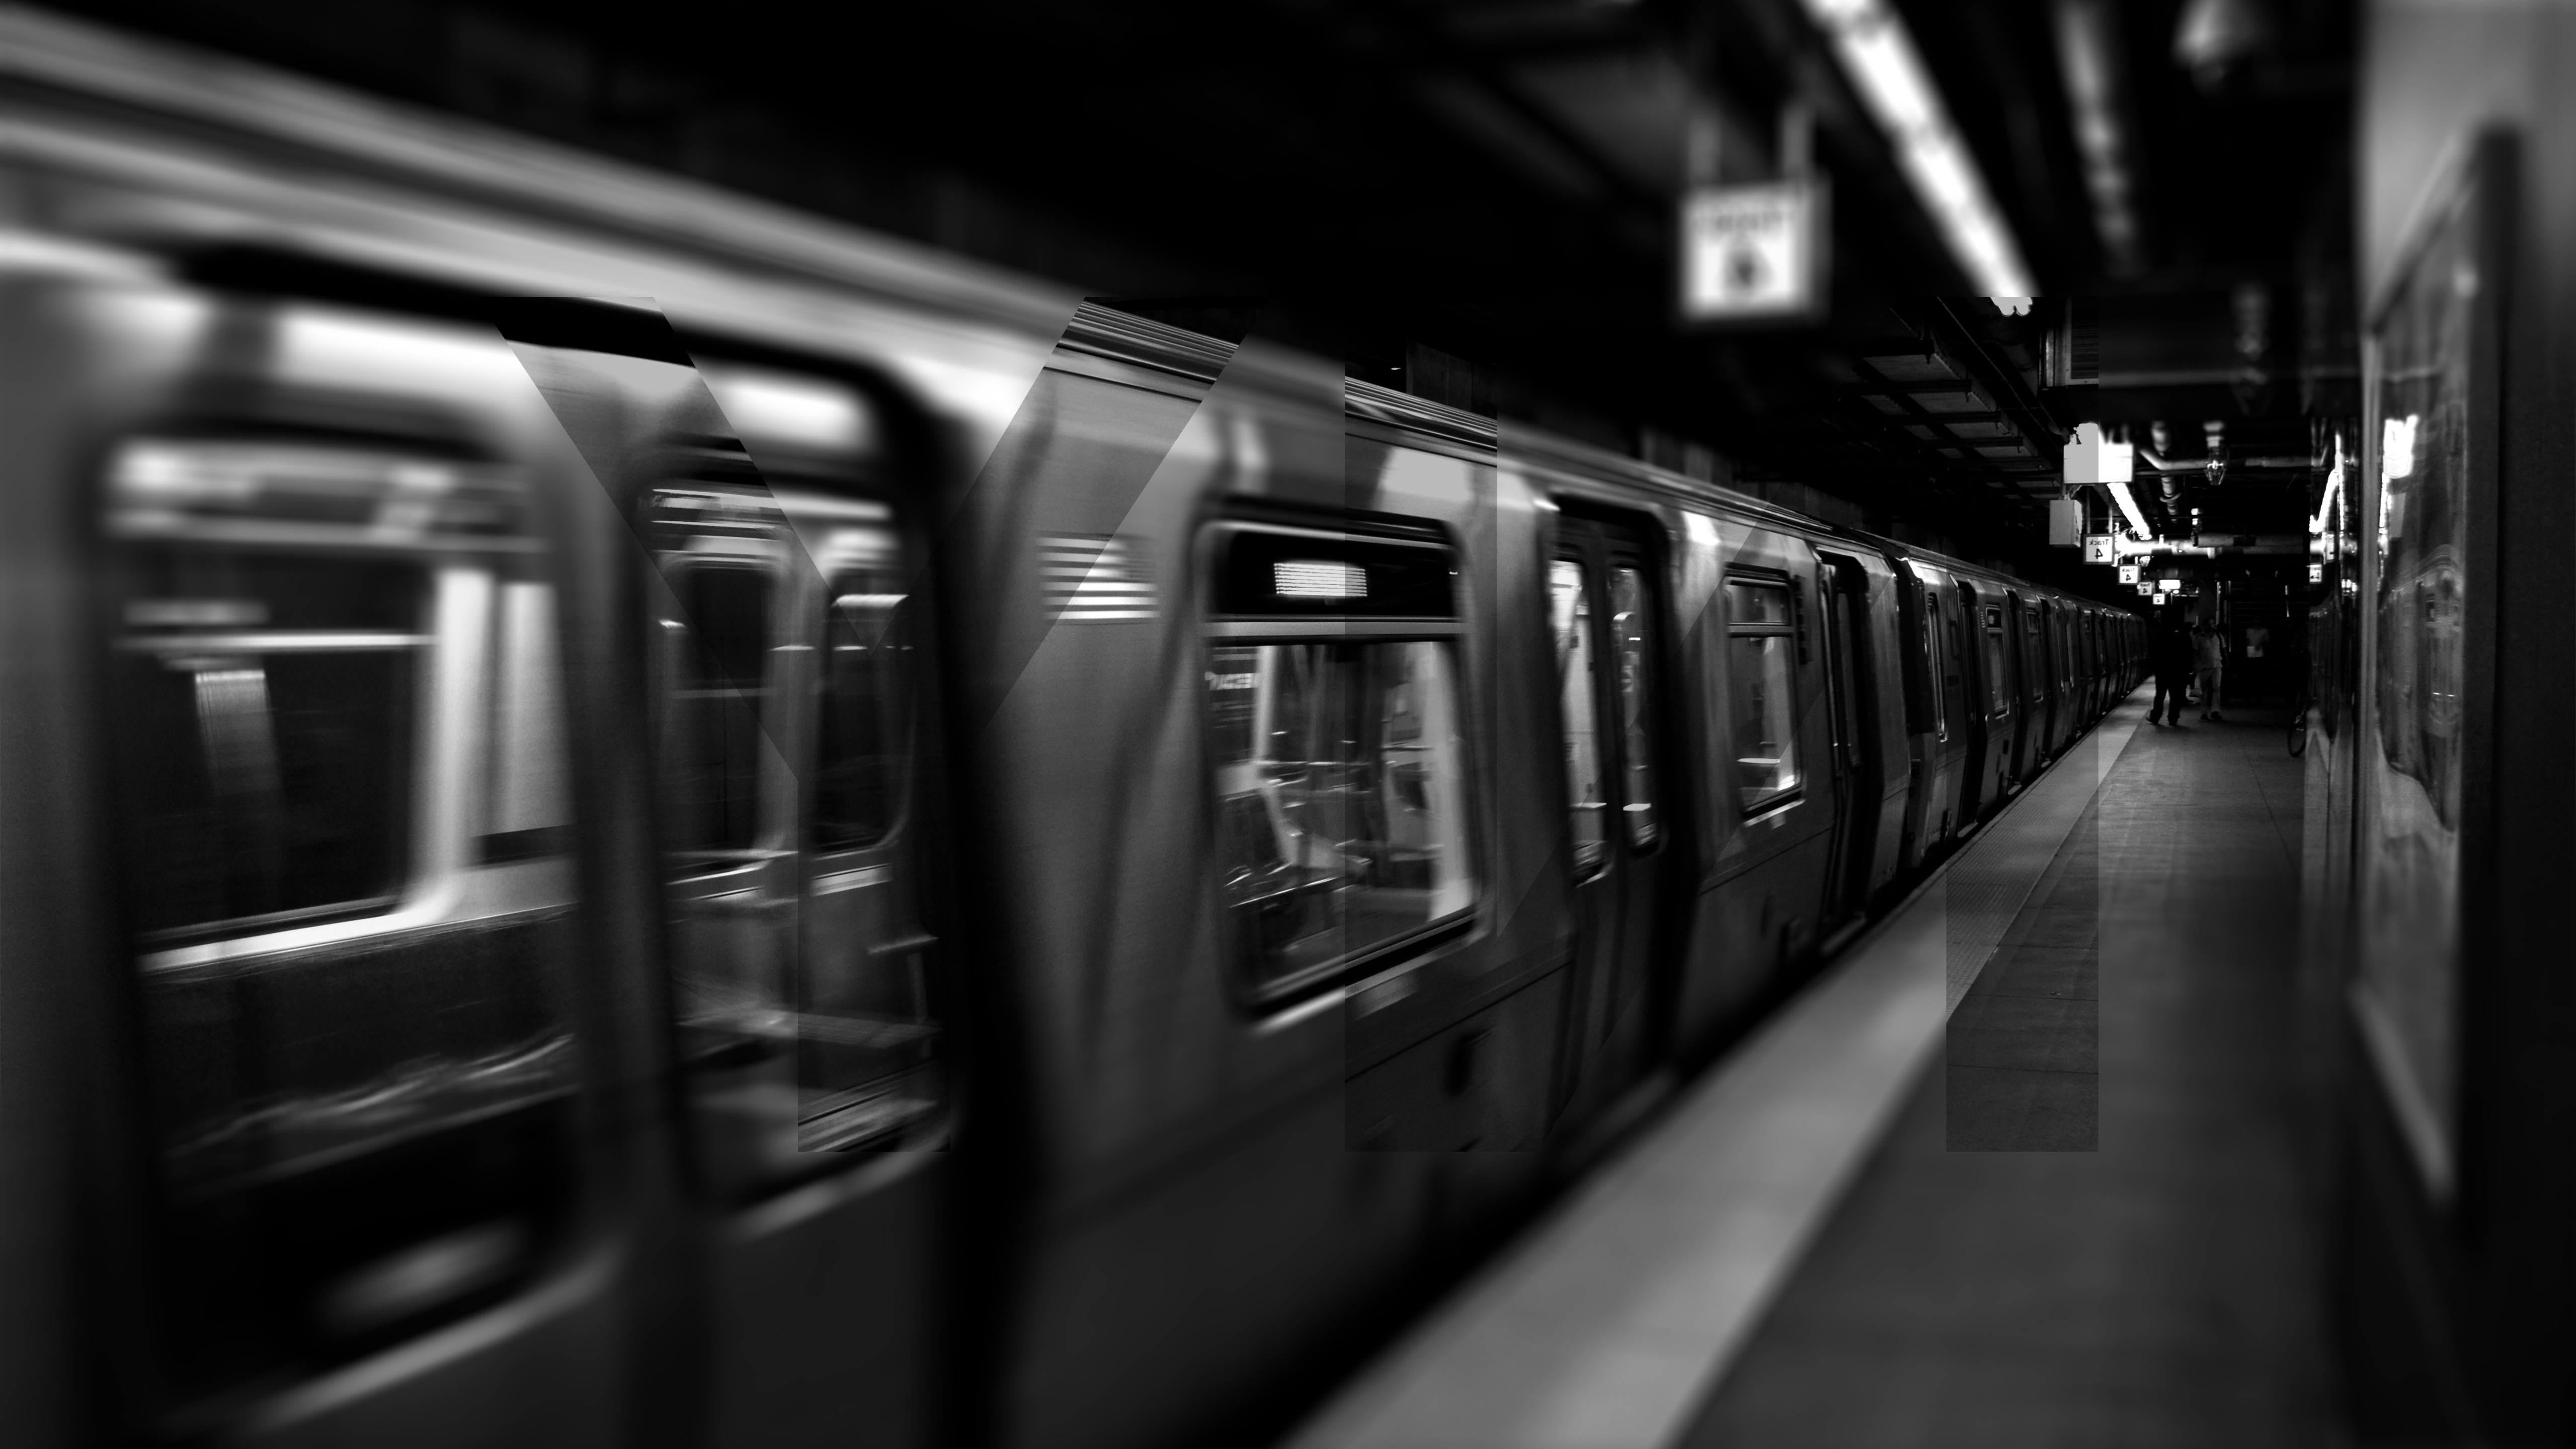 New york city underground subway train hd world k wallpapers images backgrounds photos and pictures